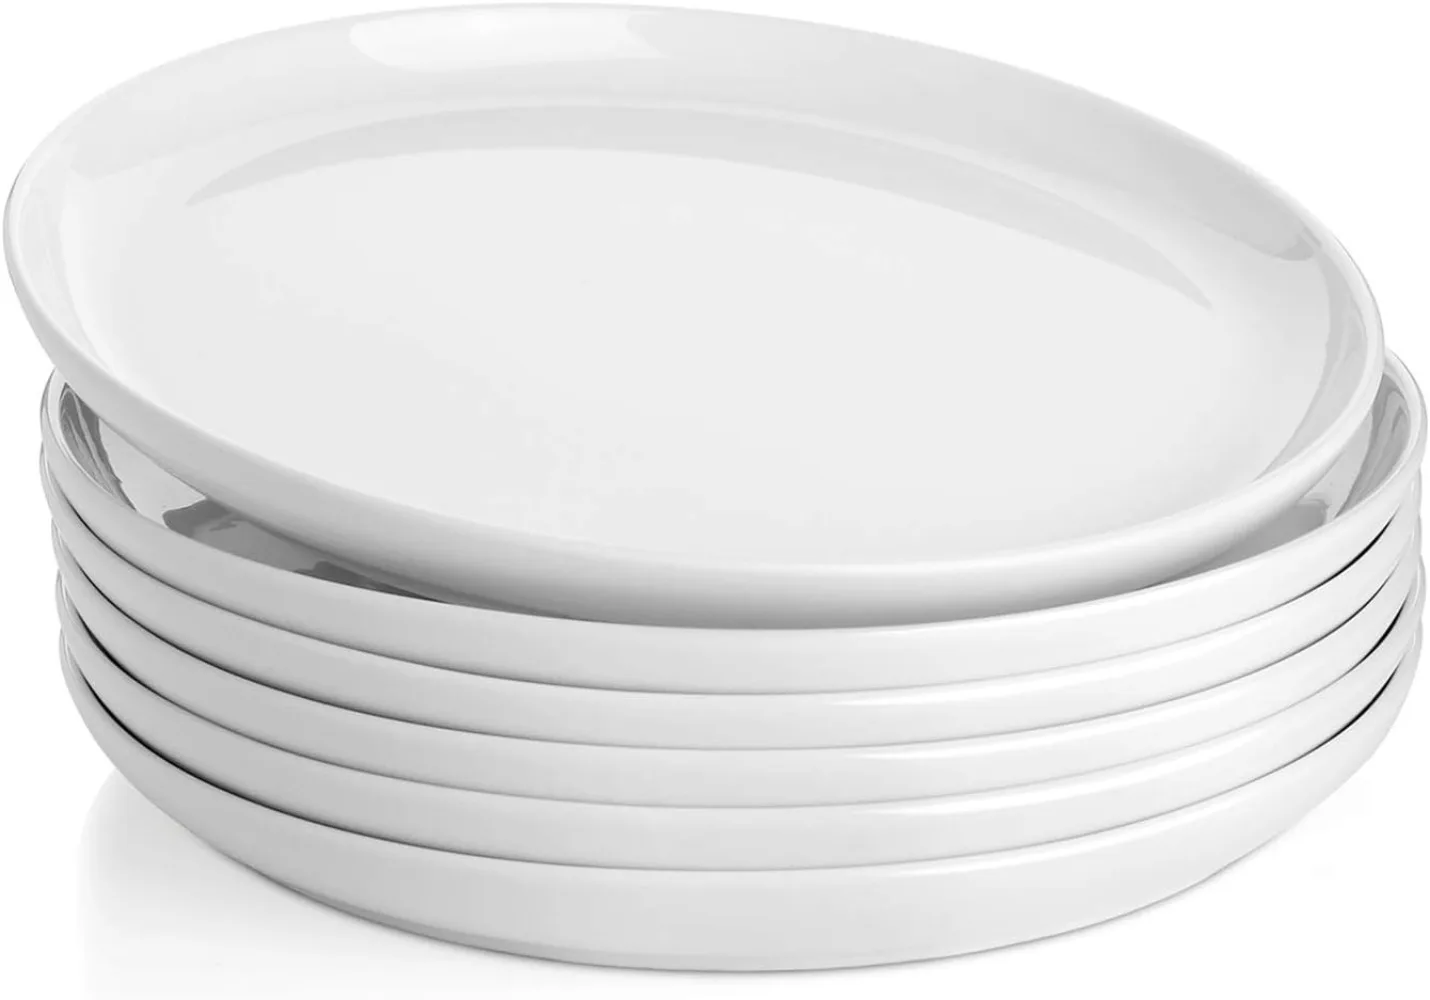 

Sweese Porcelain White Dinner Plates Set of 6, Dishwasher, Microwave, Oven Safe,10 Inch Salad Serving Modern Round Dishes -